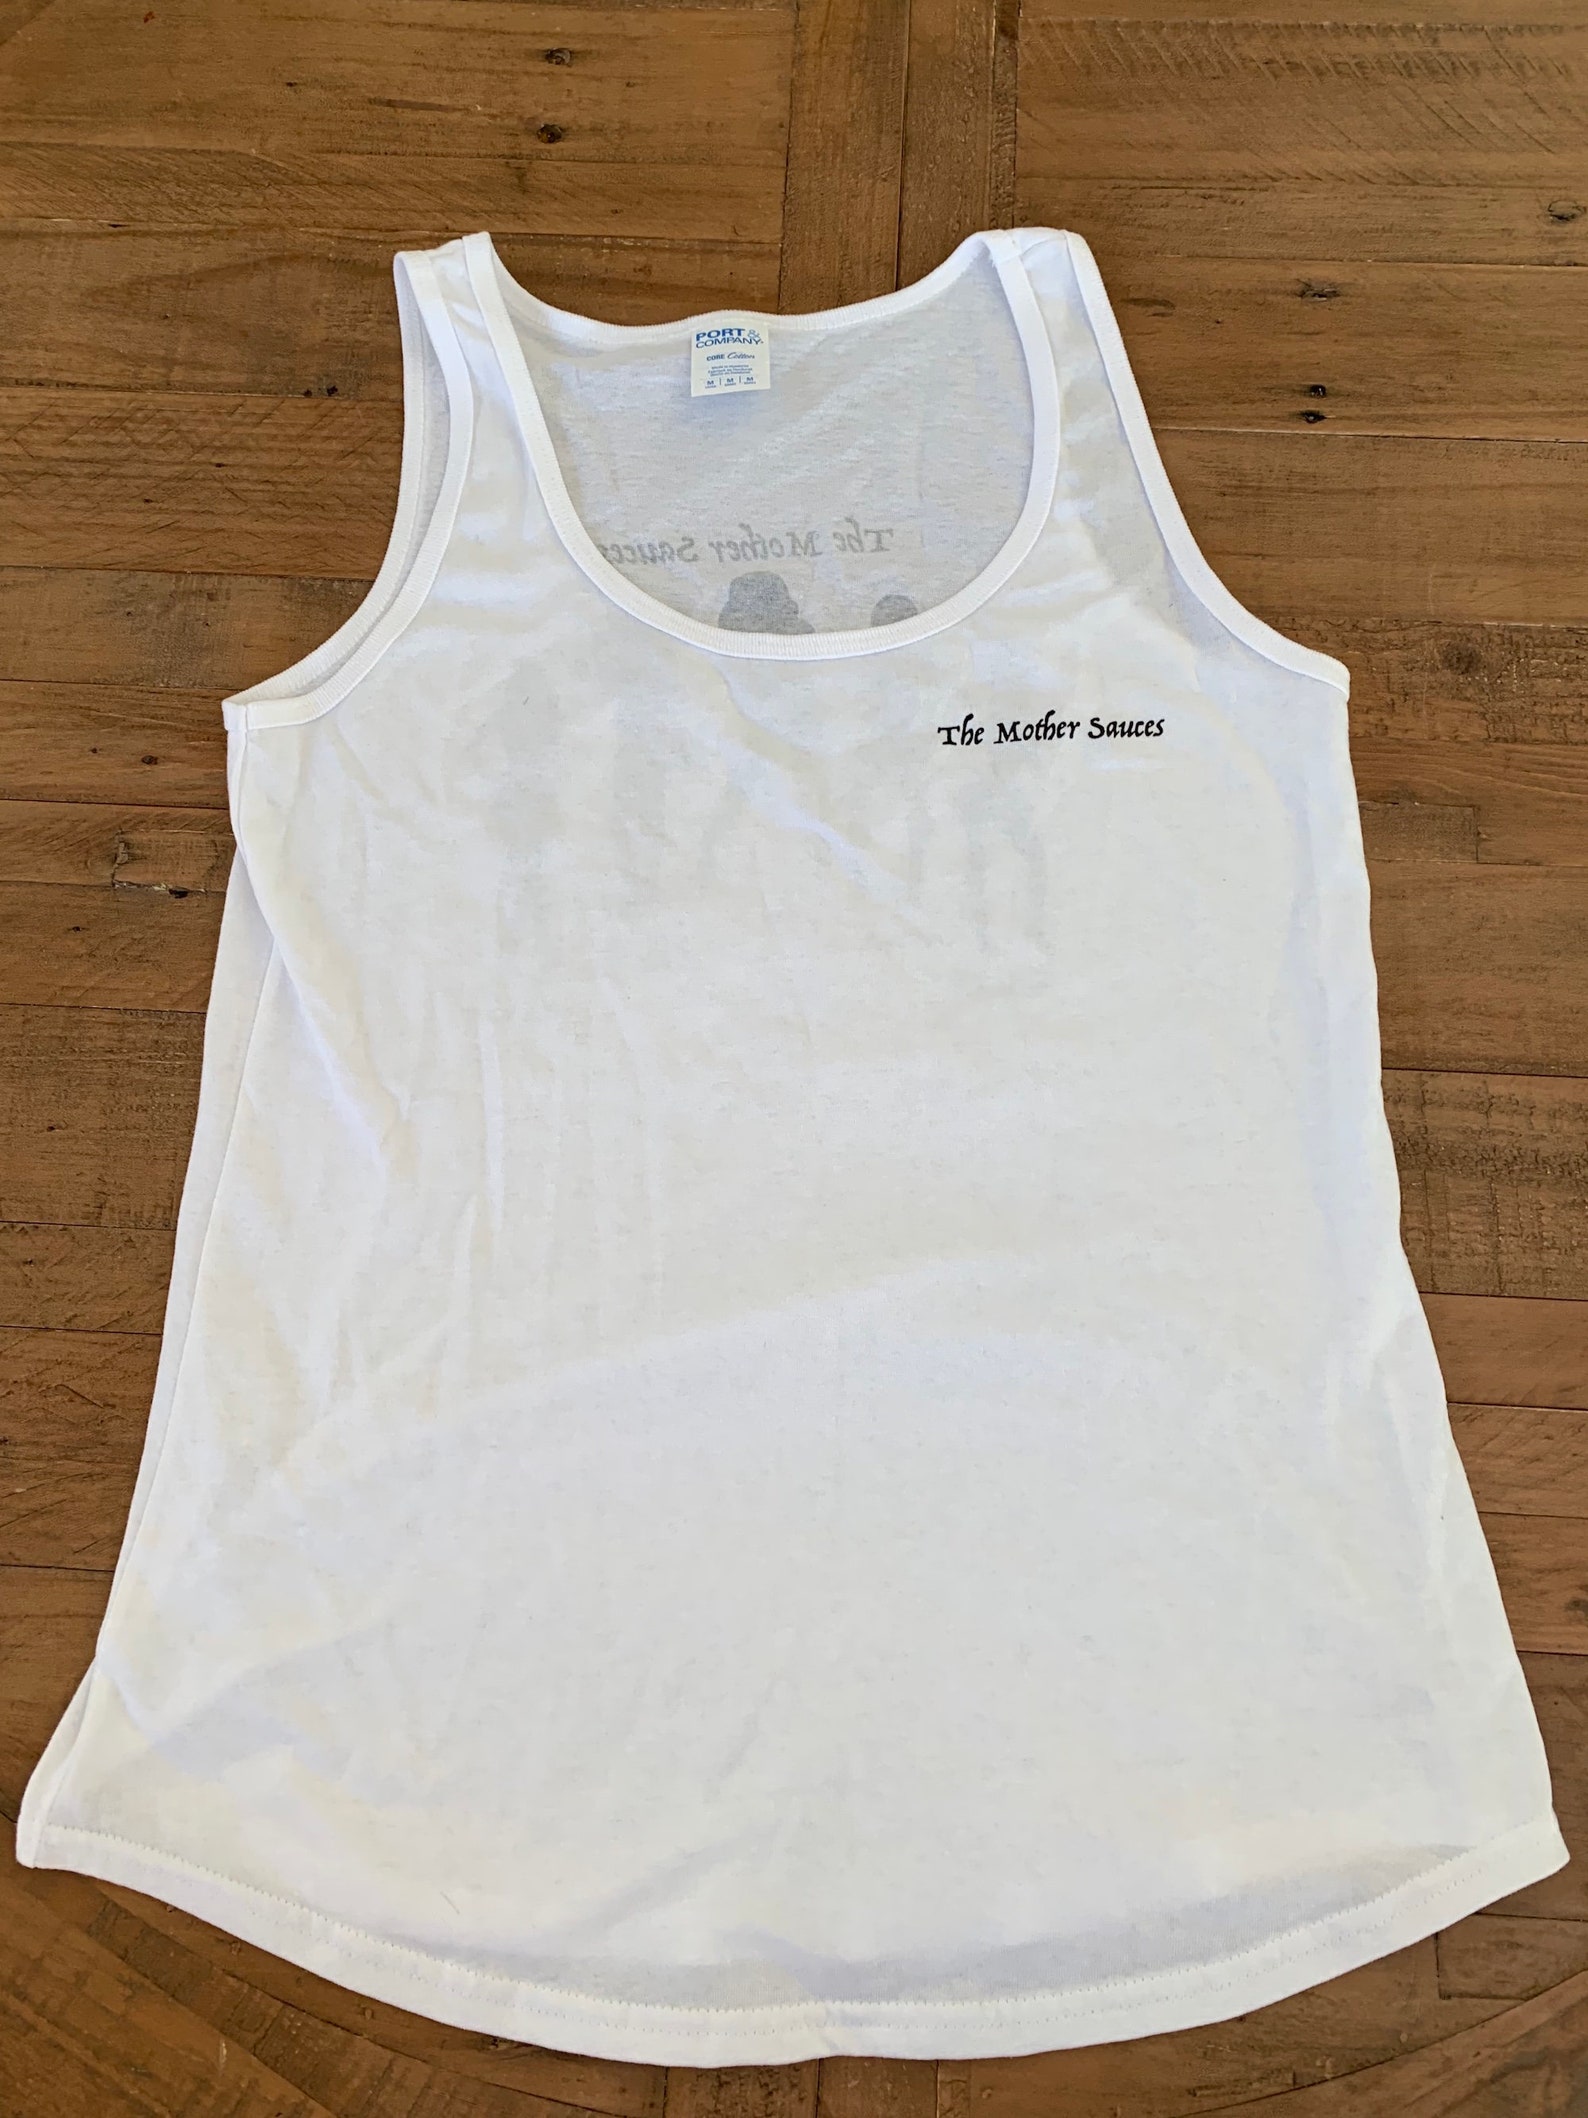 The Mother Sauces Tank Top - Etsy